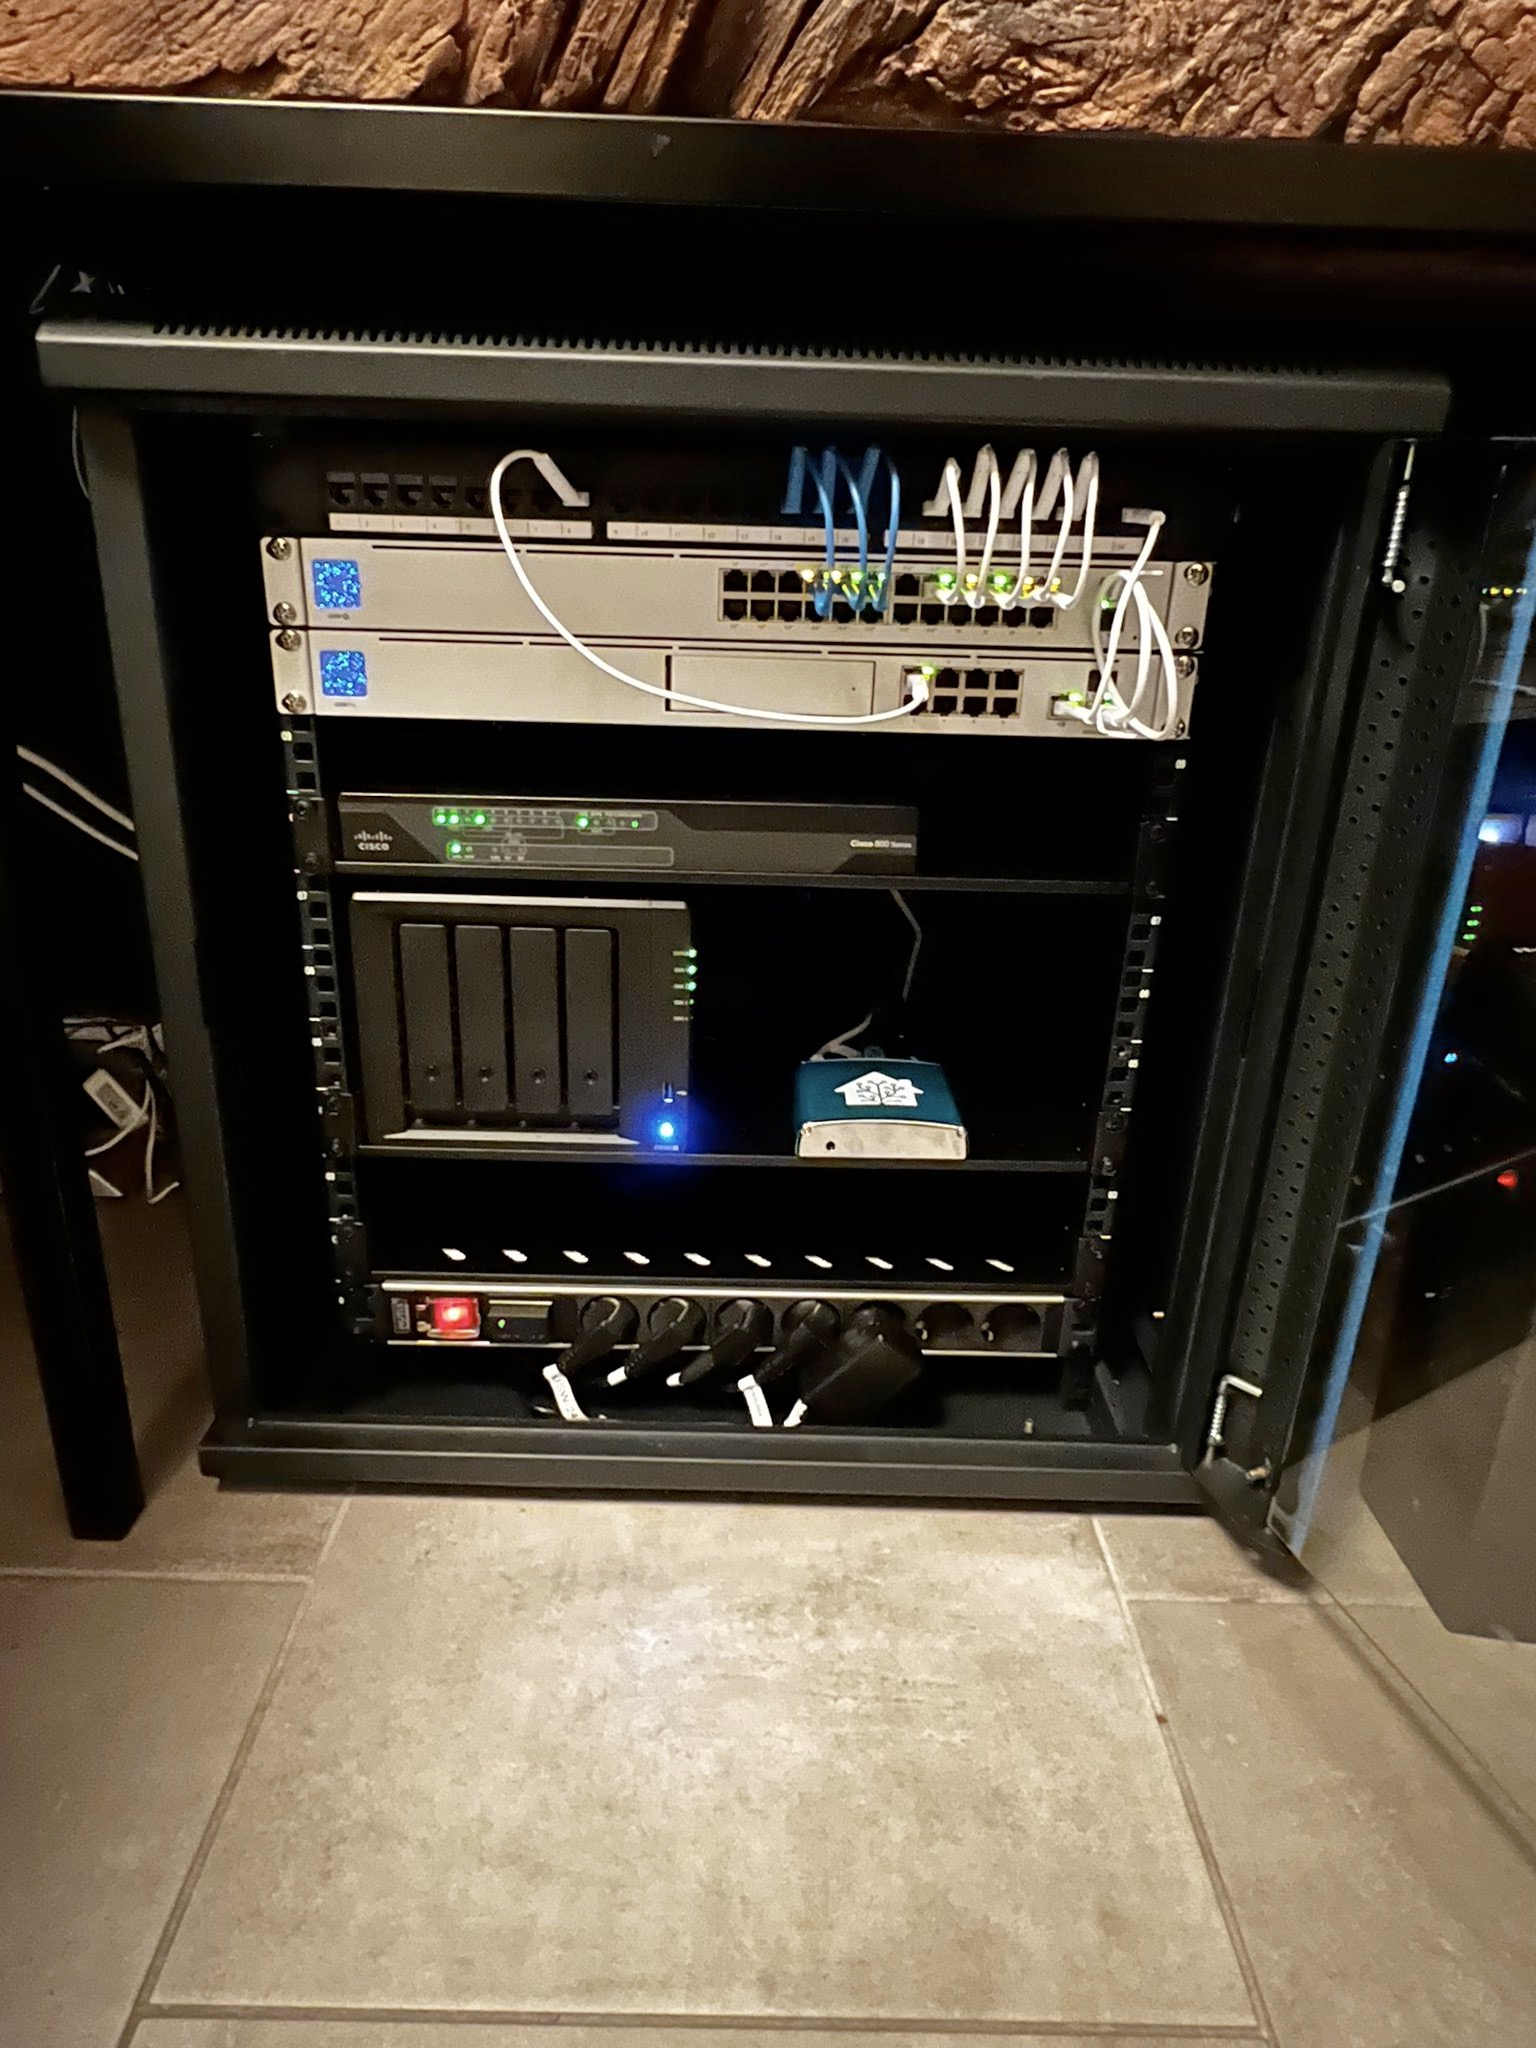 My small networking cabinet. Still very happy with it!